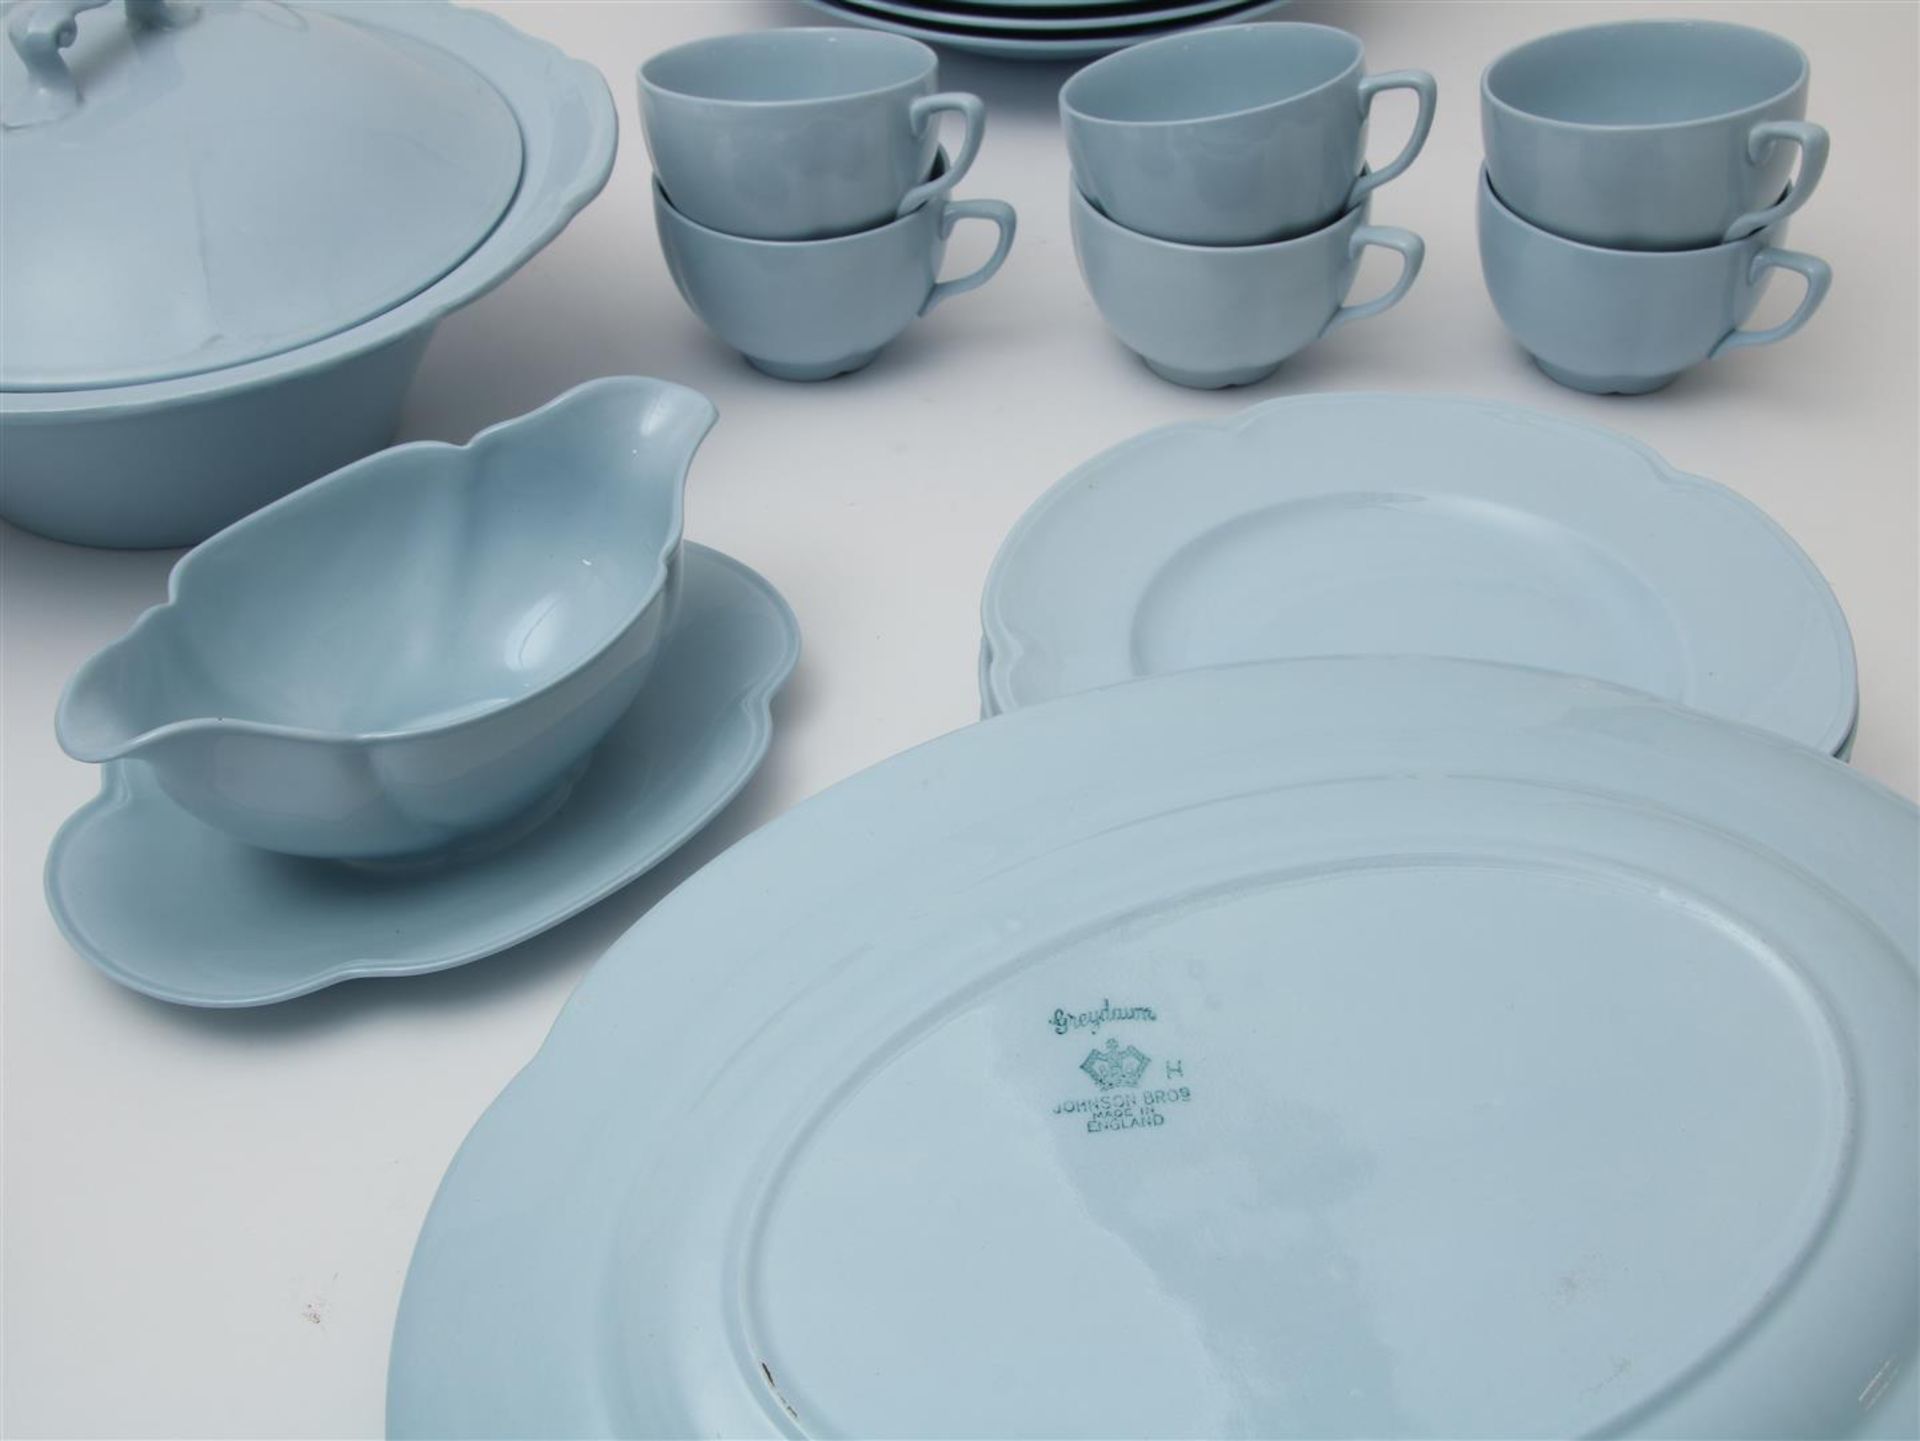 Extensive Greydawn Johnson Bros, Made in England tableware: coffee pot, 9 cups and saucers, milk - Image 2 of 2